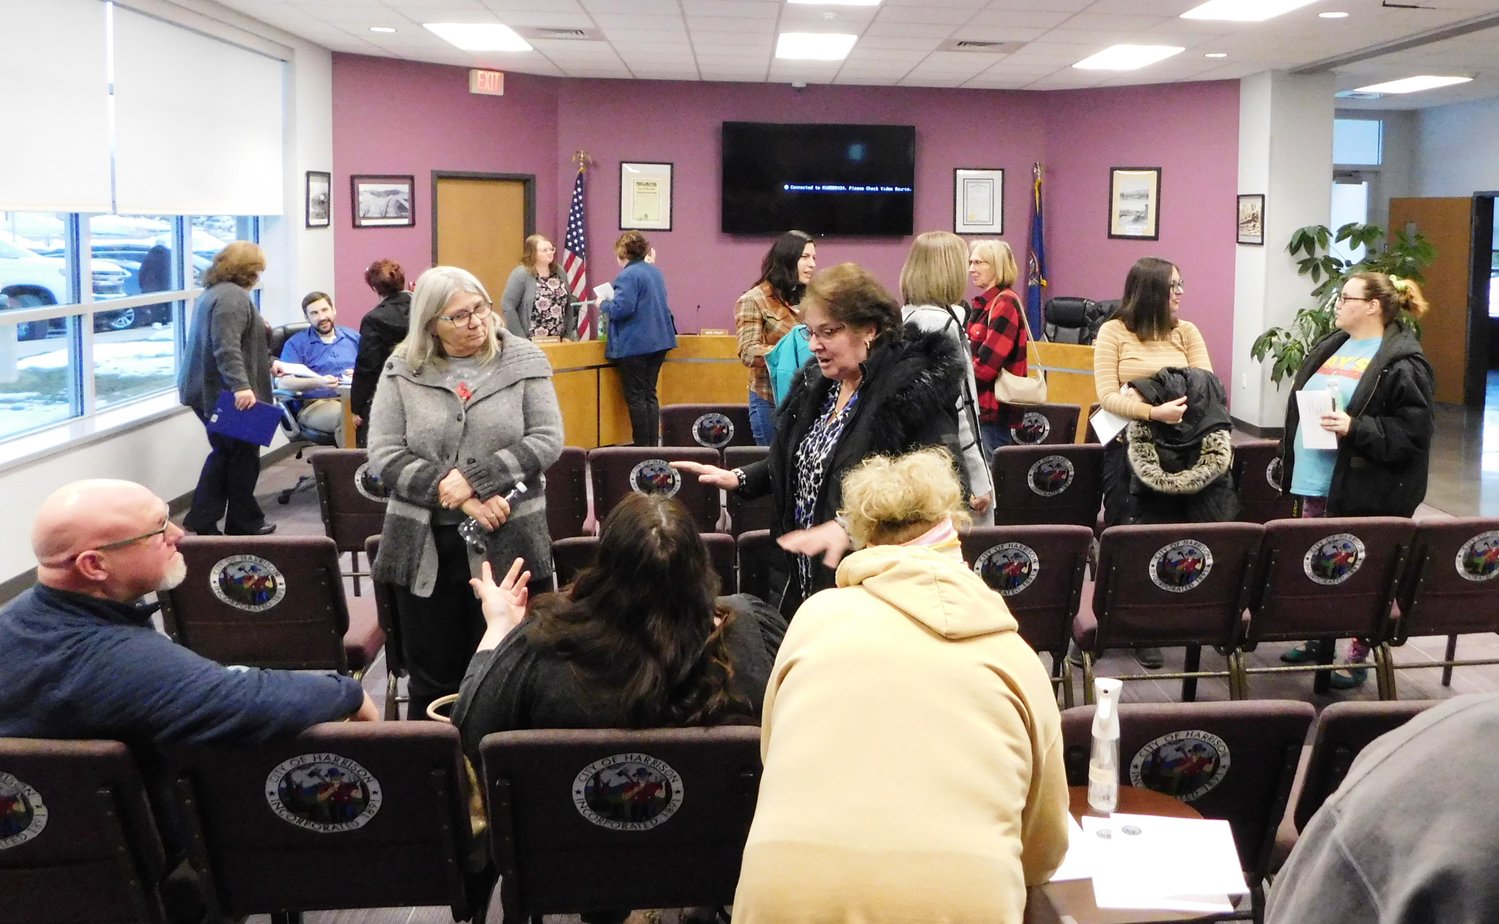 After the City of Harrison’s Feb. 20 public forum seeking commentary on the Harrison City Market, some of the many attendees linger to continue their discussion of ideas for possible self-sustaining uses for the that facility.